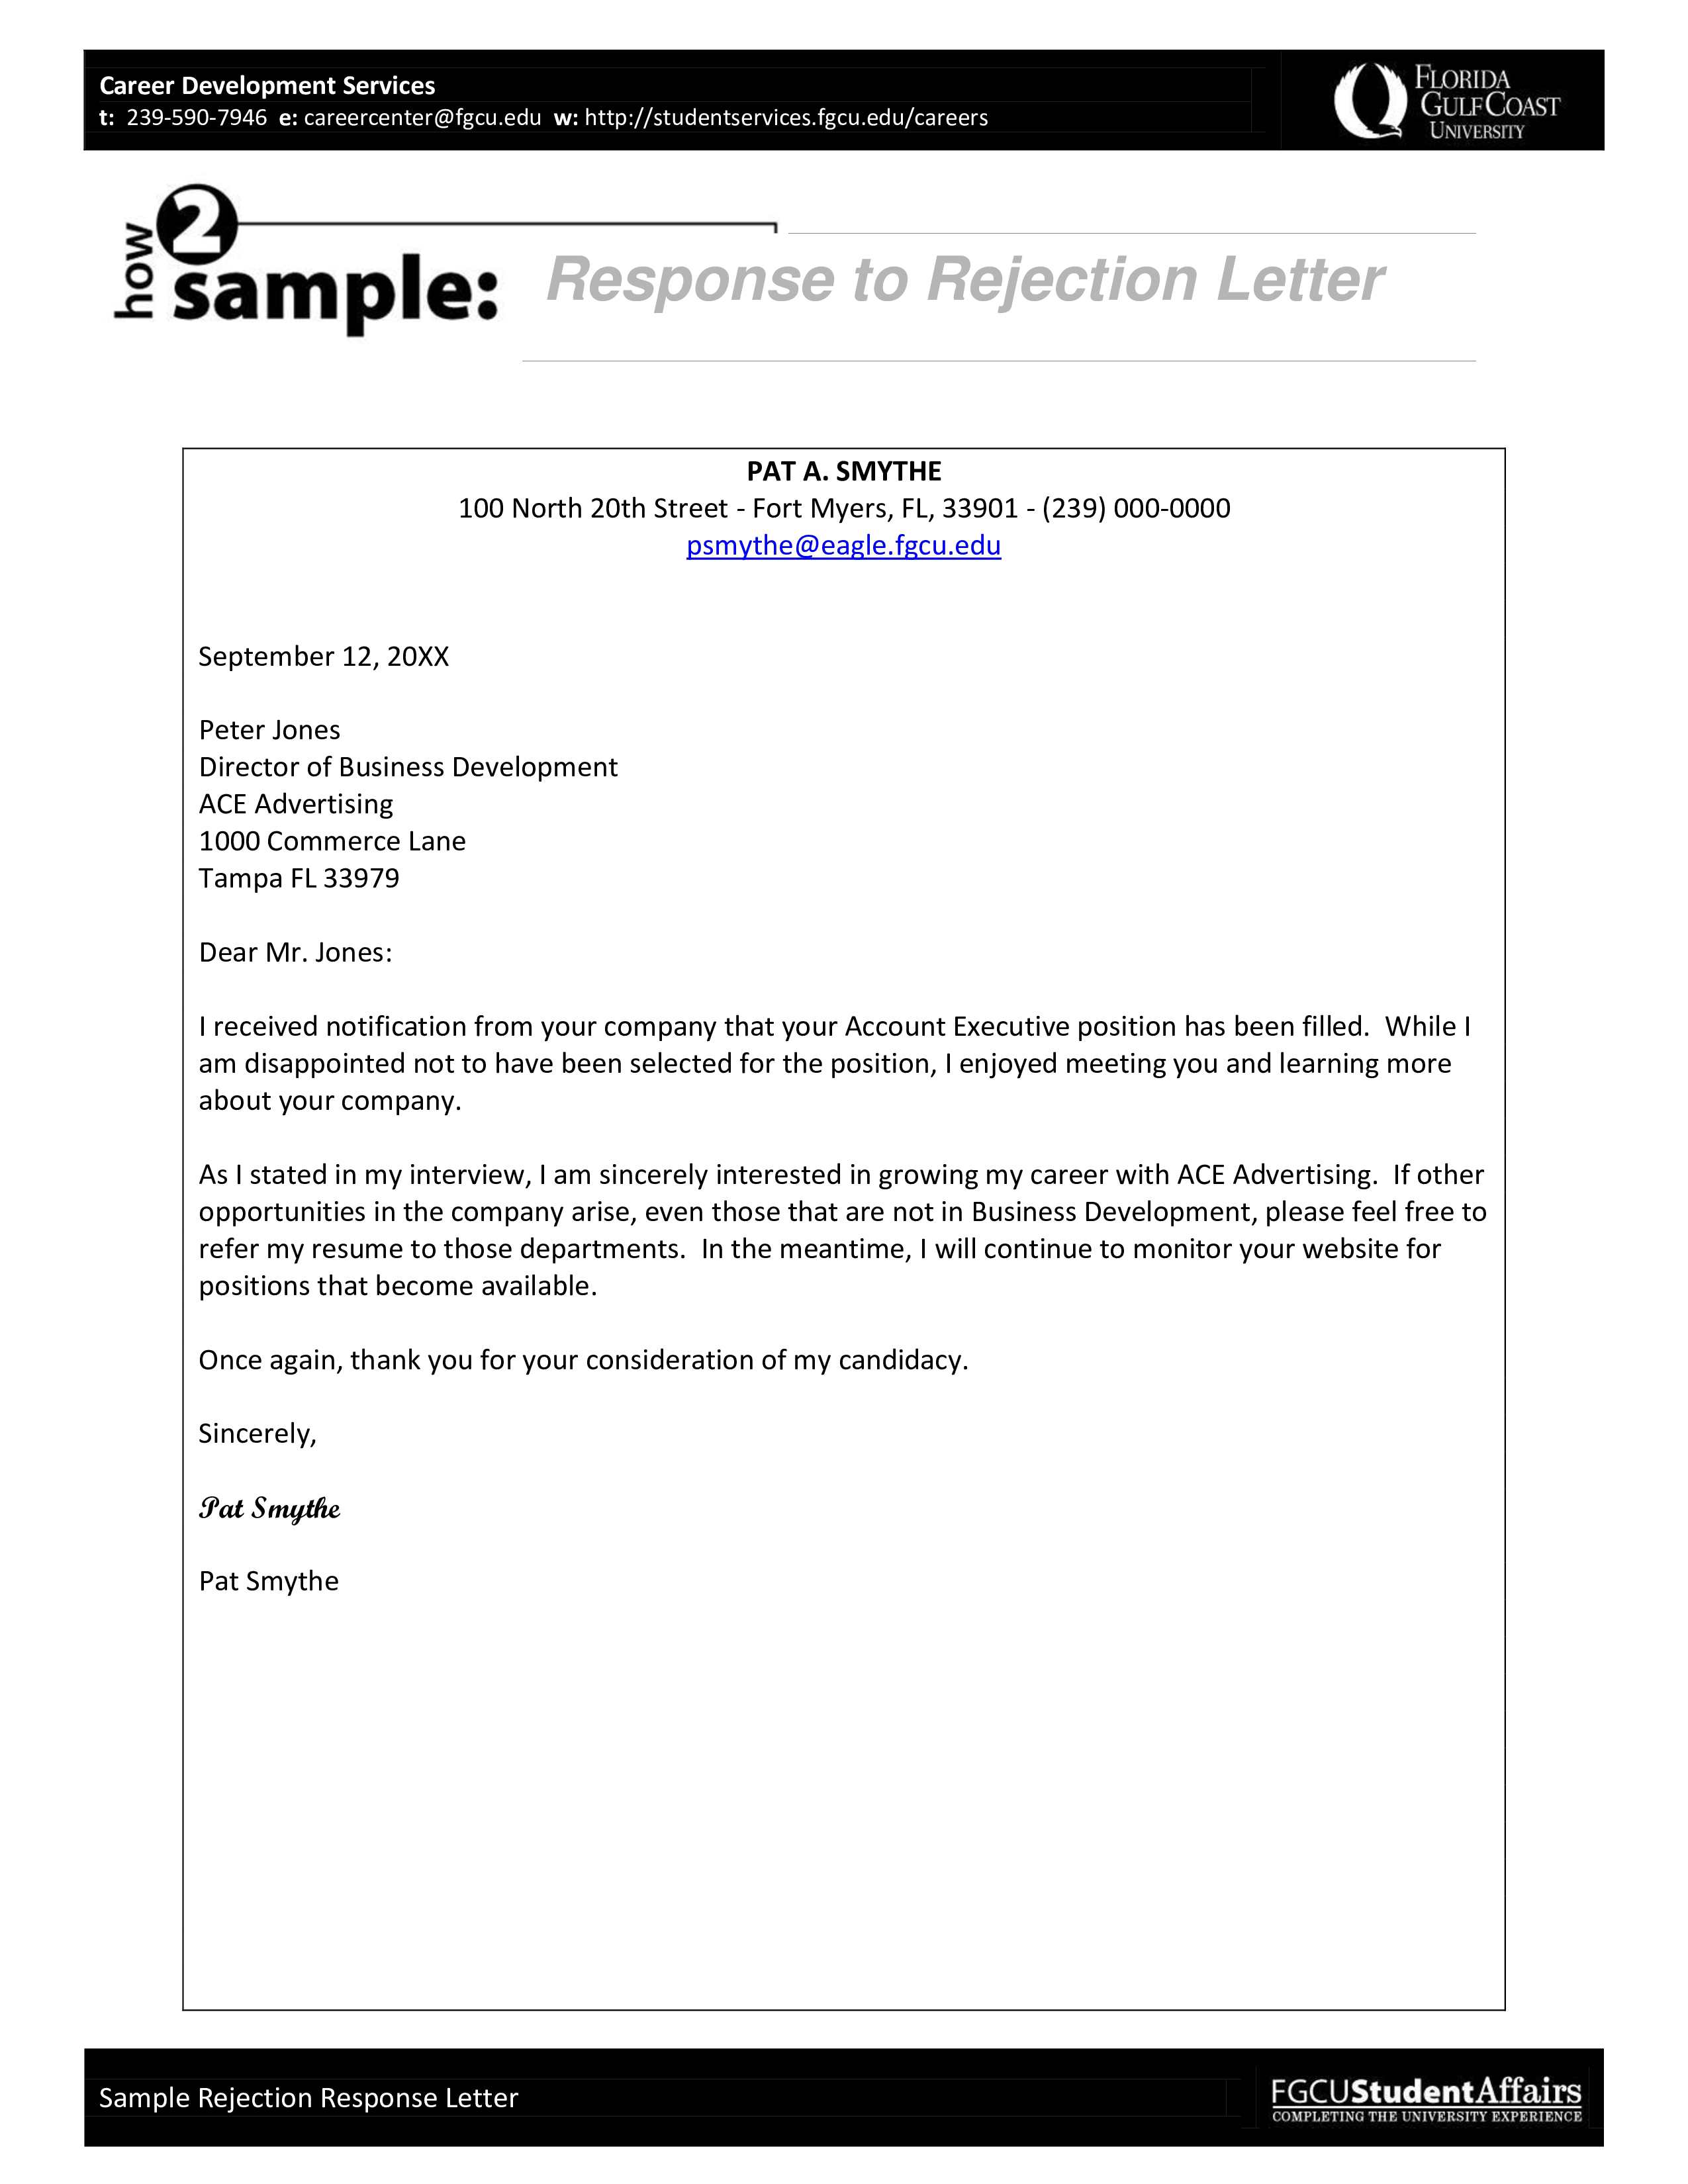 Rejection Response Letter main image